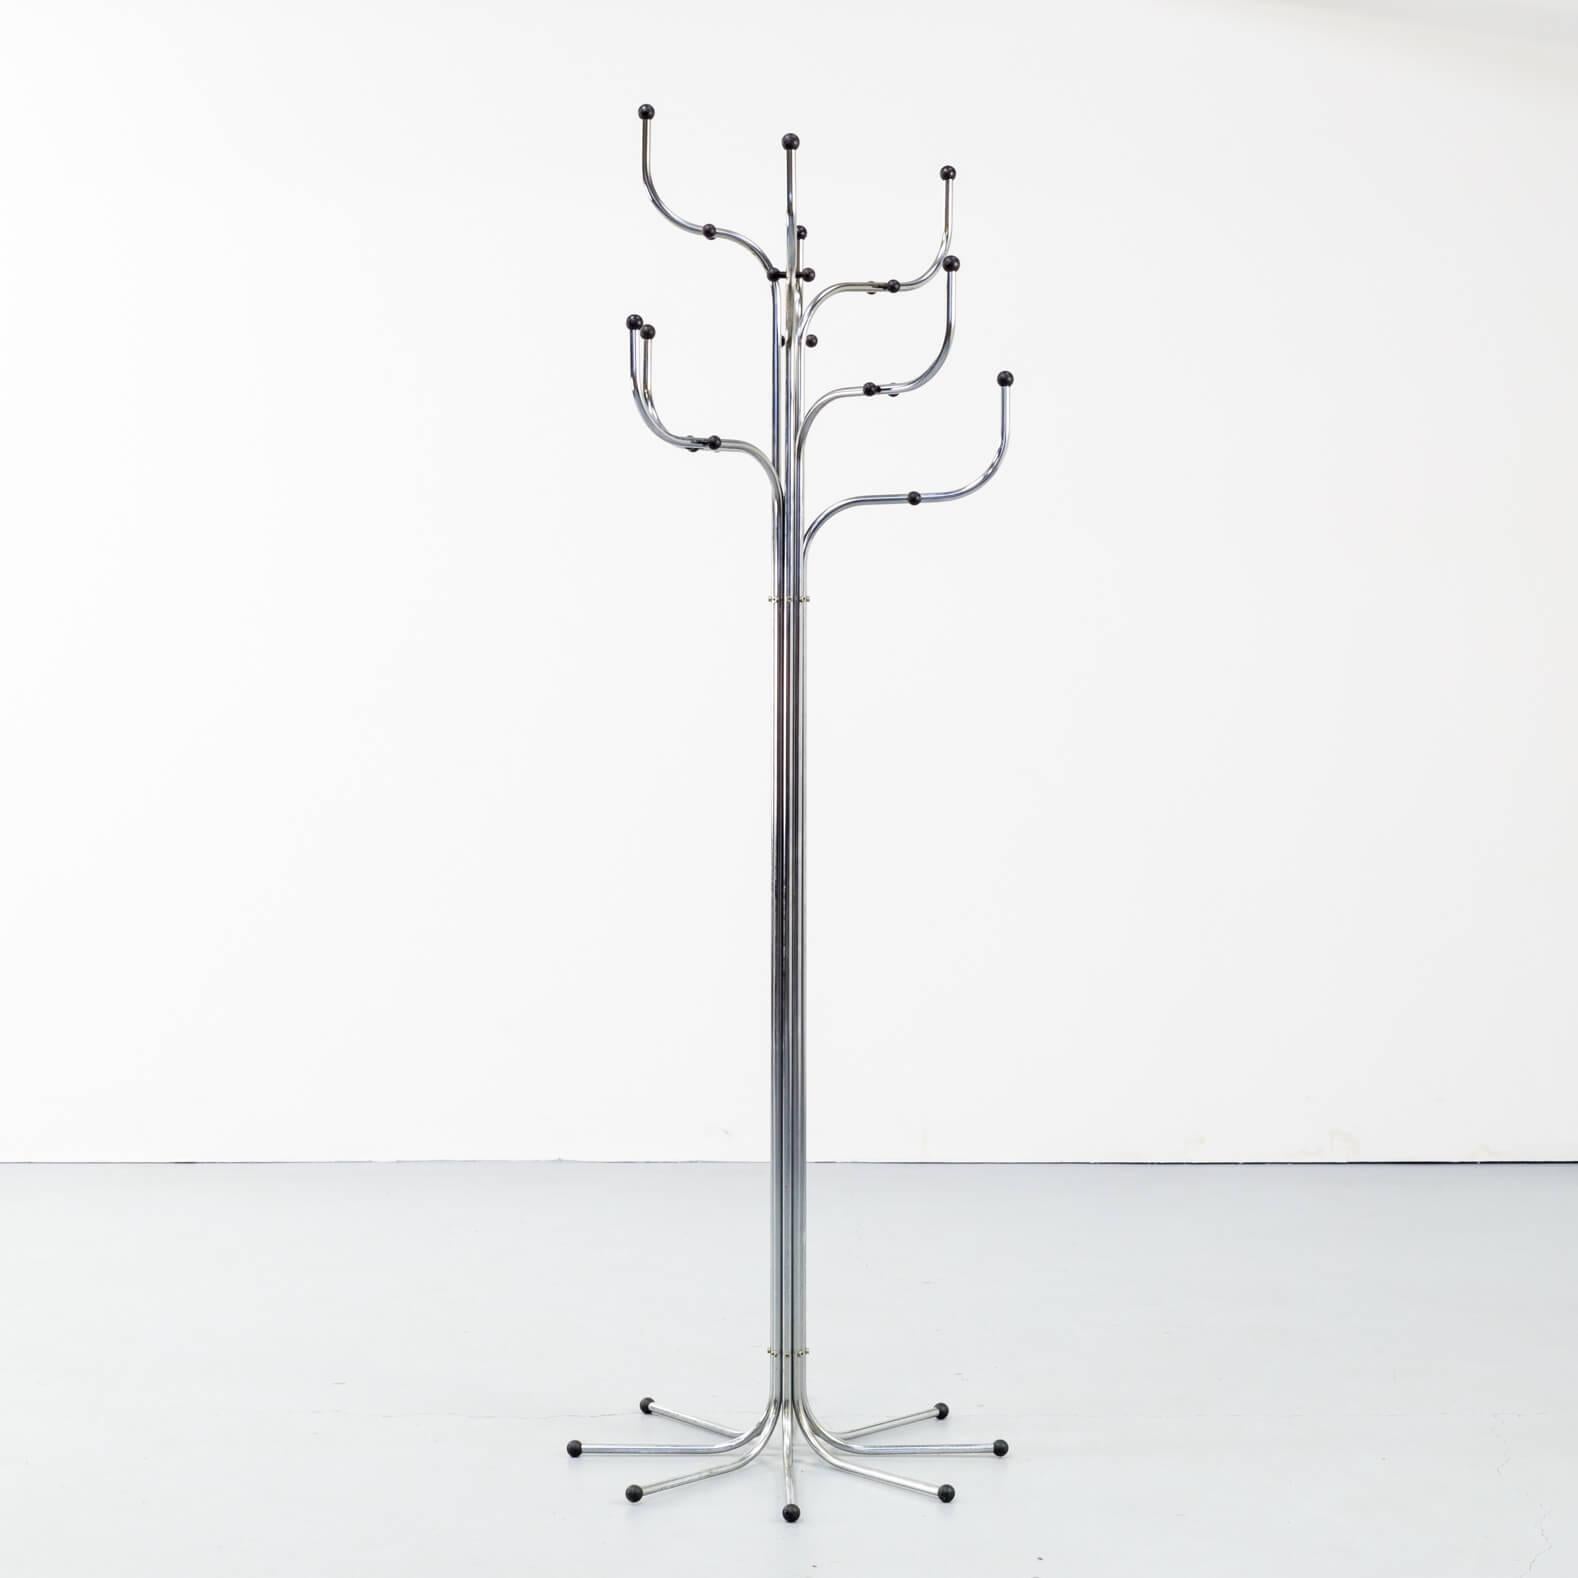 The ‘tree’ coat rack was designed by Sidse Werner for manufacturer Fritz Hansen, one of the best known and oldest Scandinavian design brands.